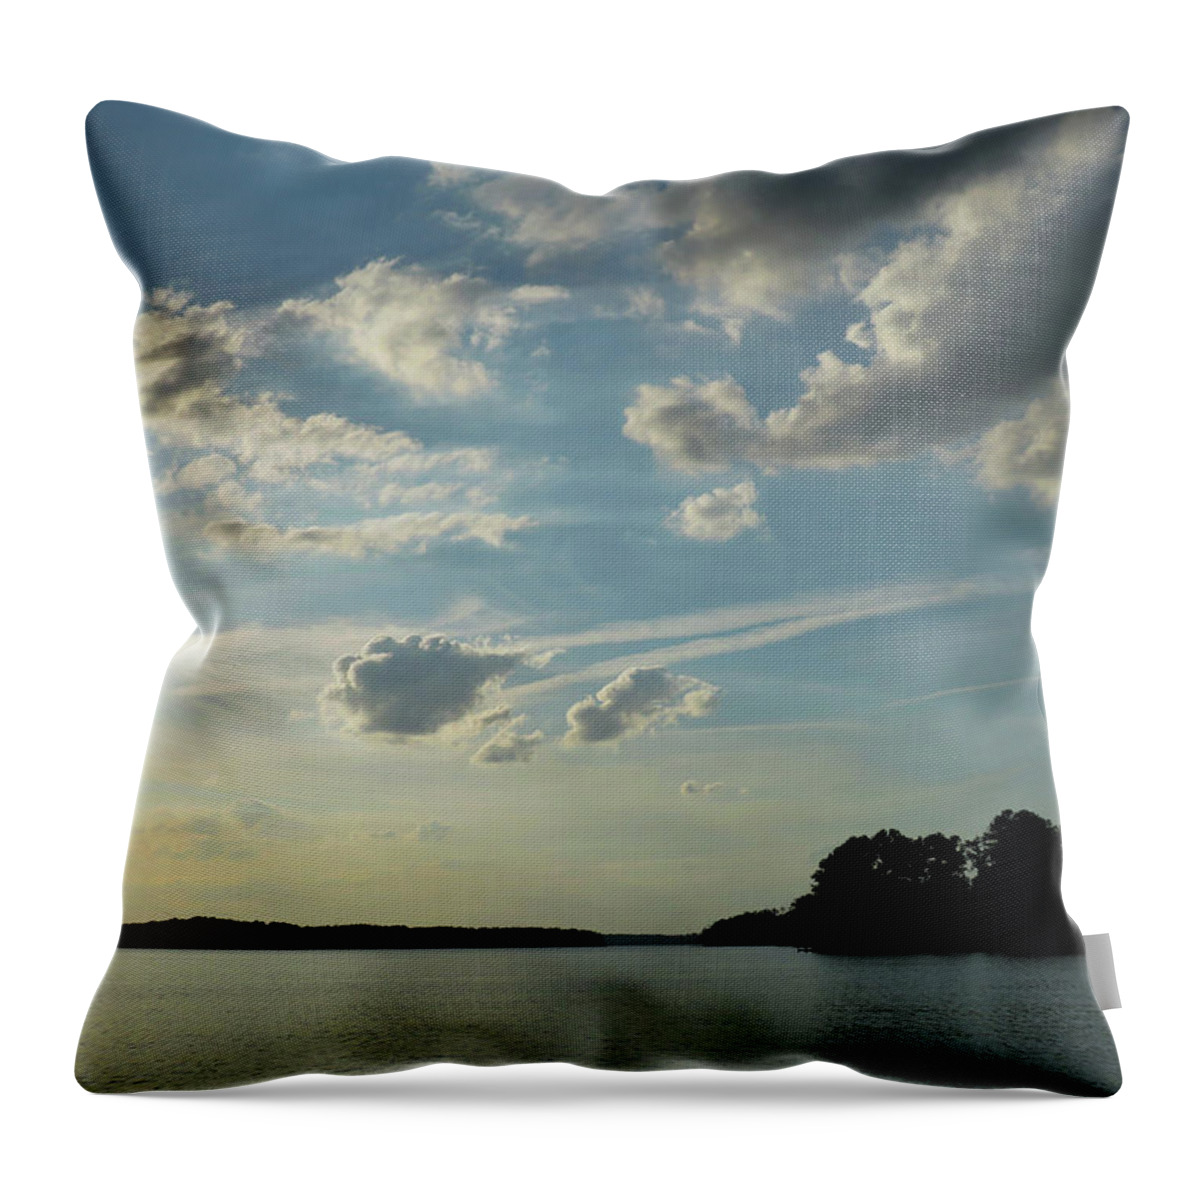 Clouds Throw Pillow featuring the photograph Cloud Reproduction by Ed Williams